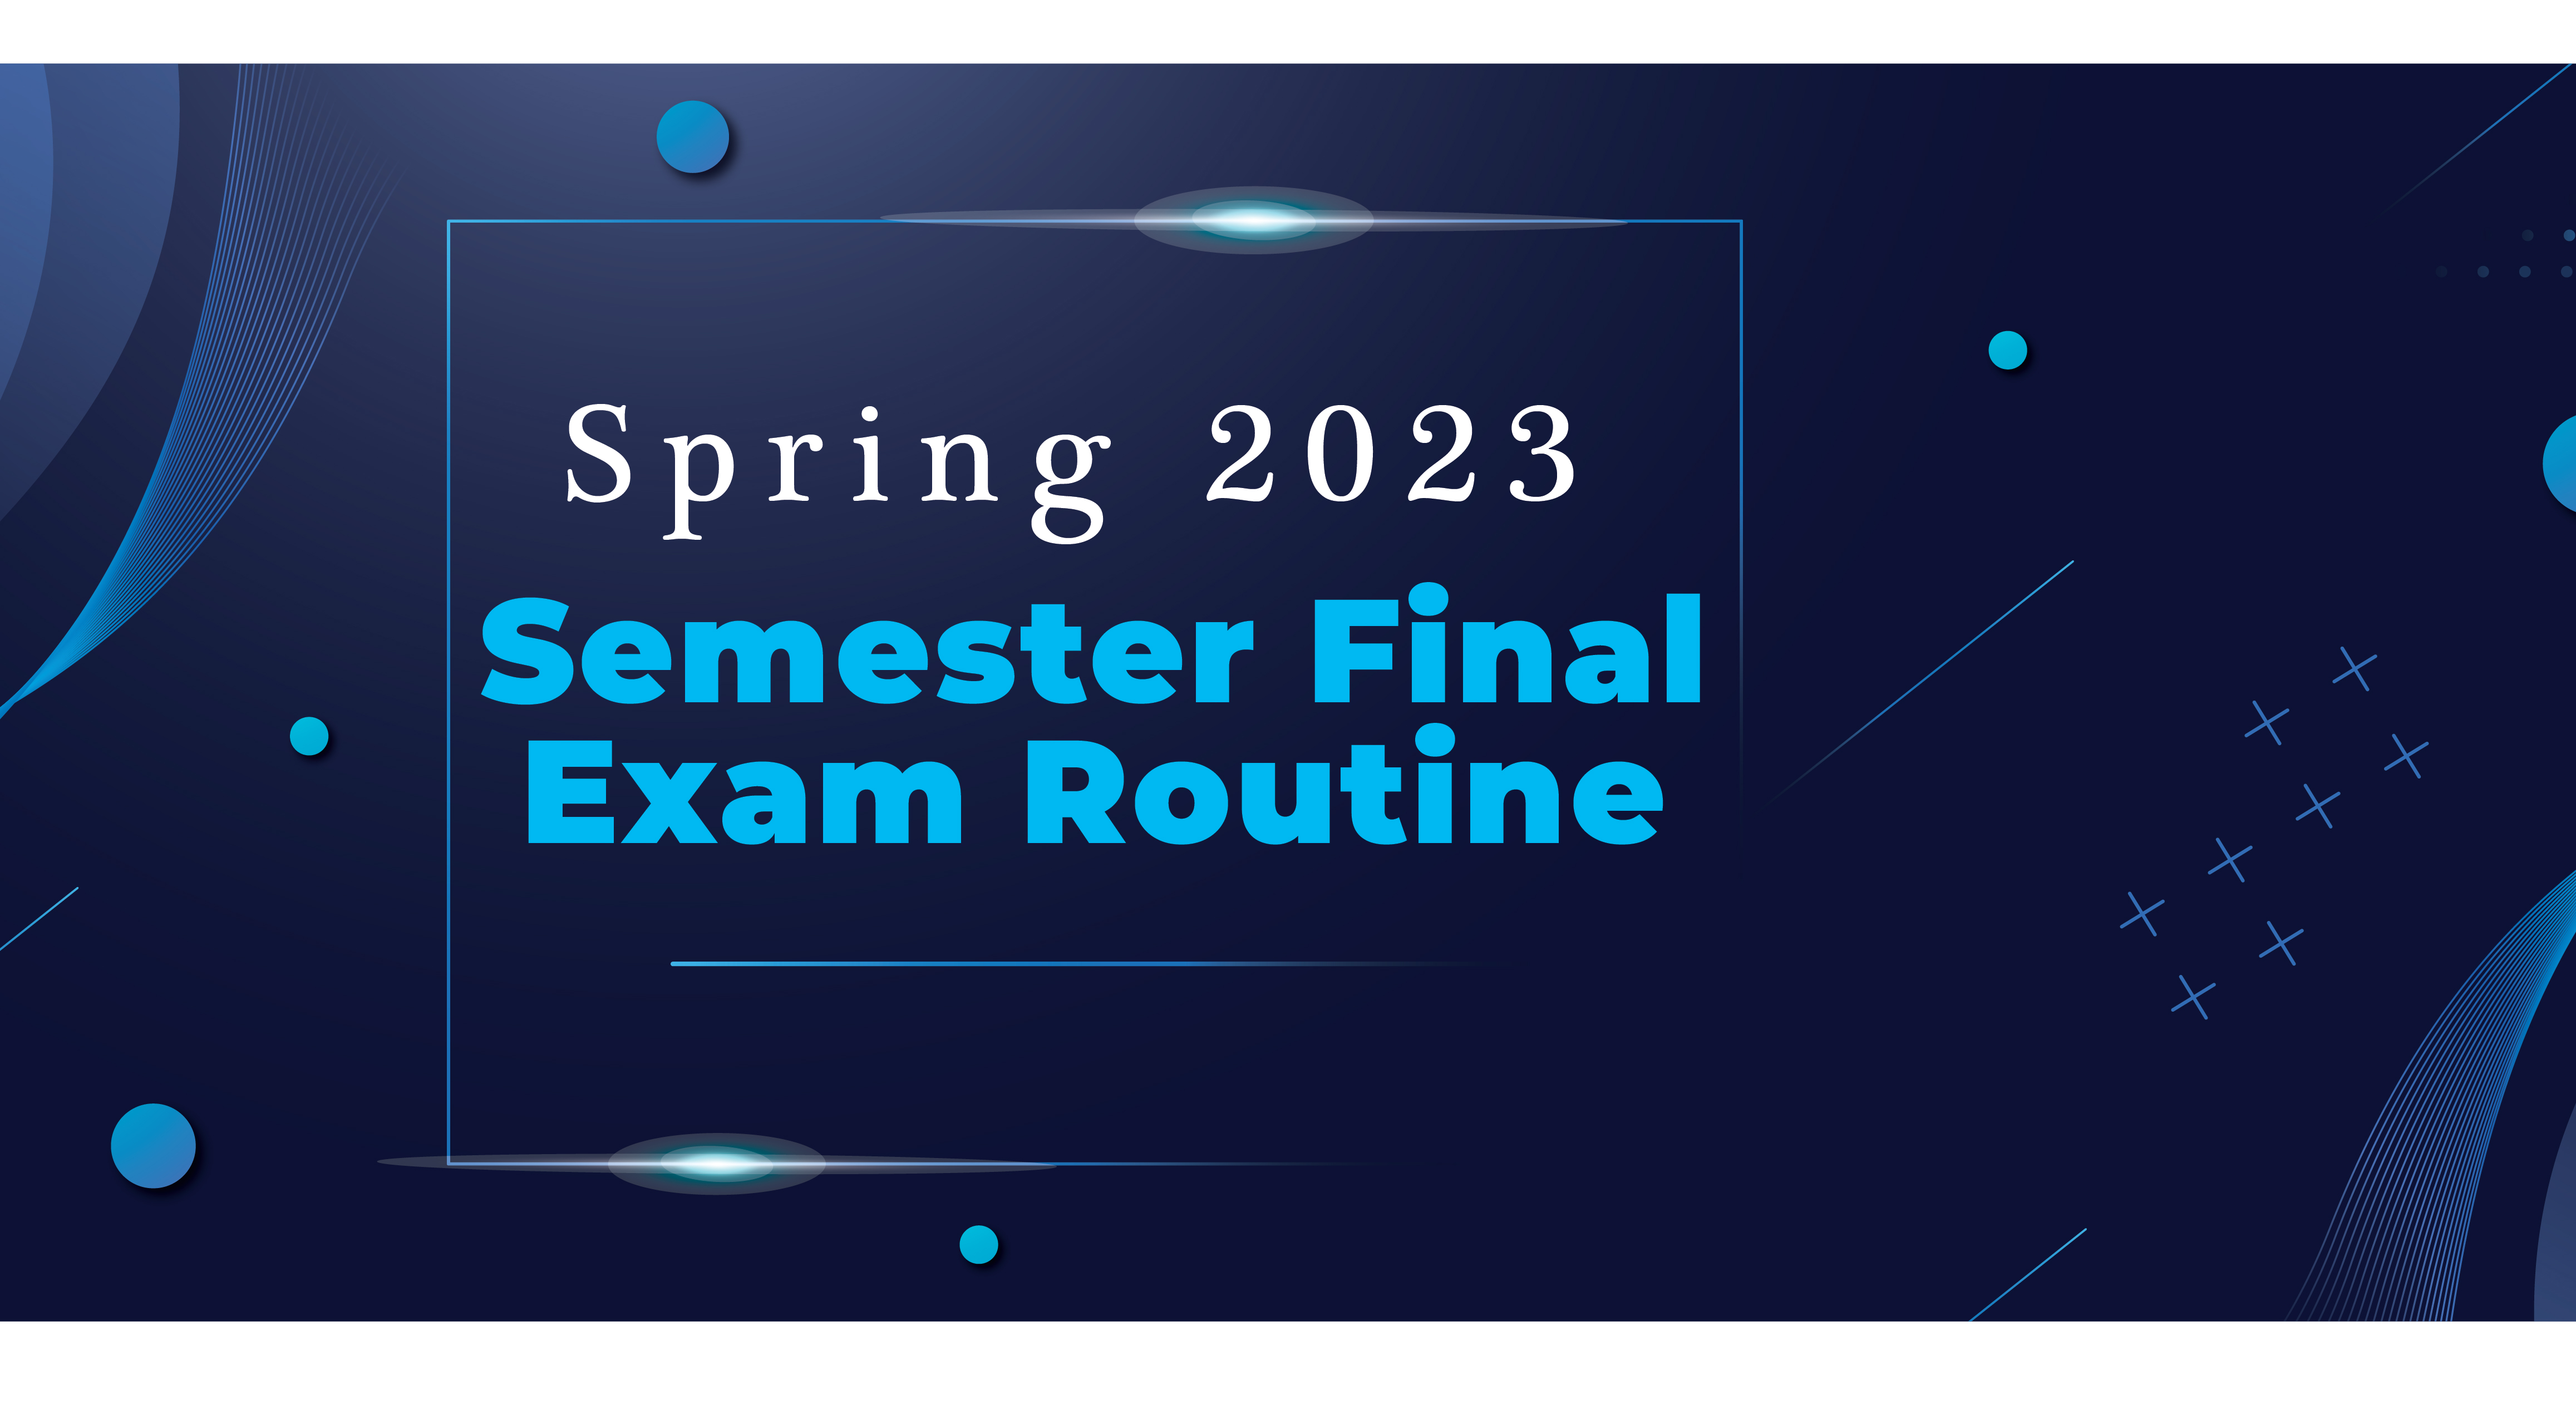 SPRING 2023 SEMESTER FINAL EXAM ROUTINE FOR INFORMATION SCIENCE & LIBRARY MANAGEMENT